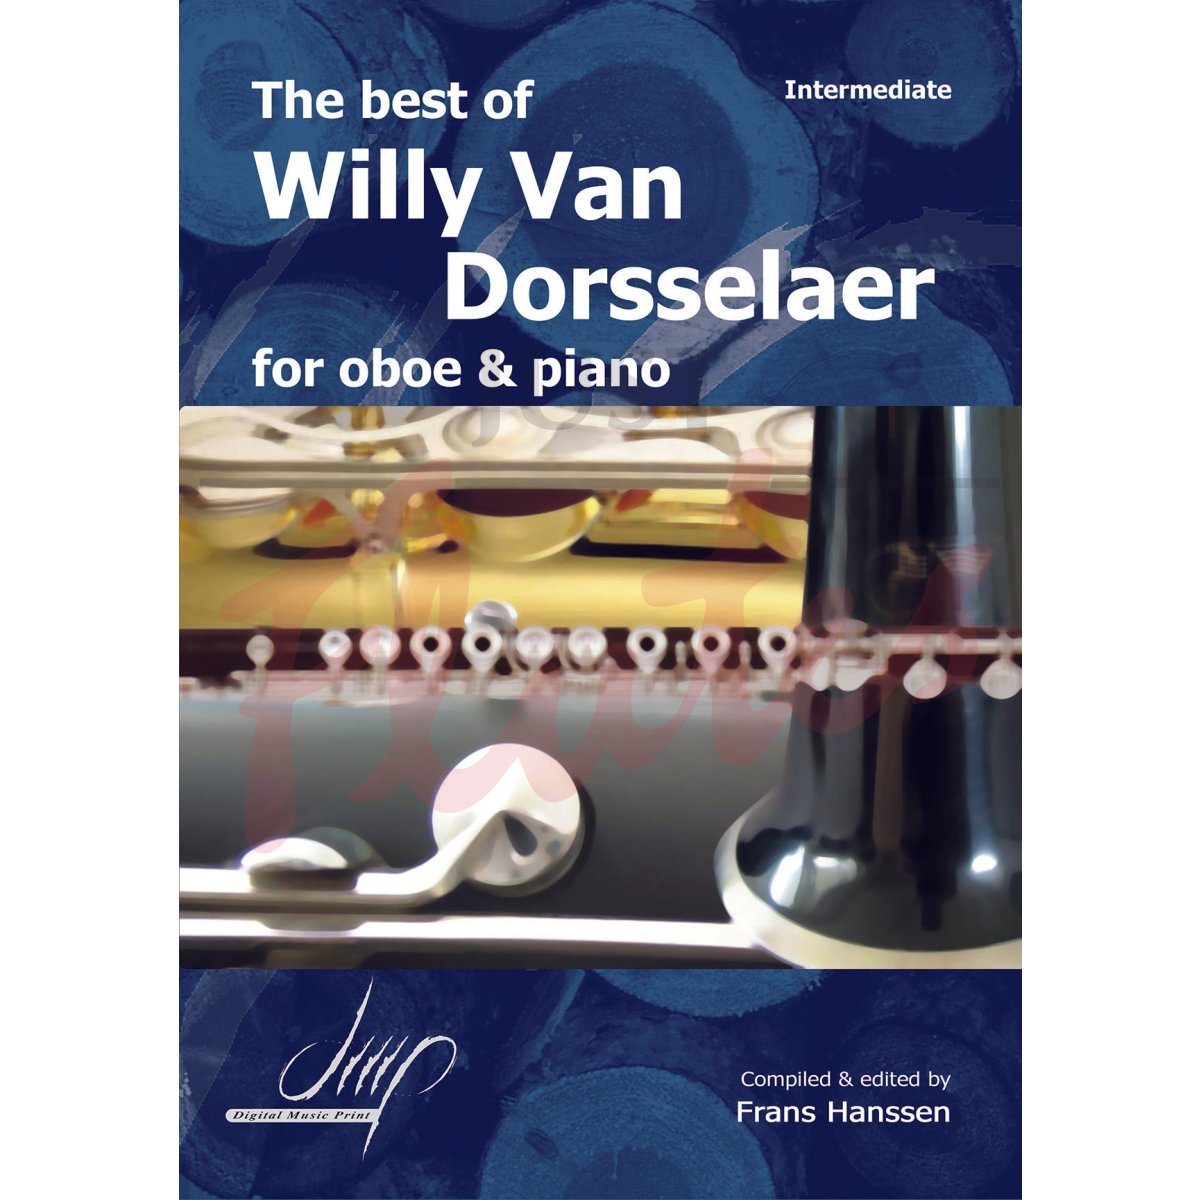 The Best of Willy Van Dorsselaer for Oboe and Piano